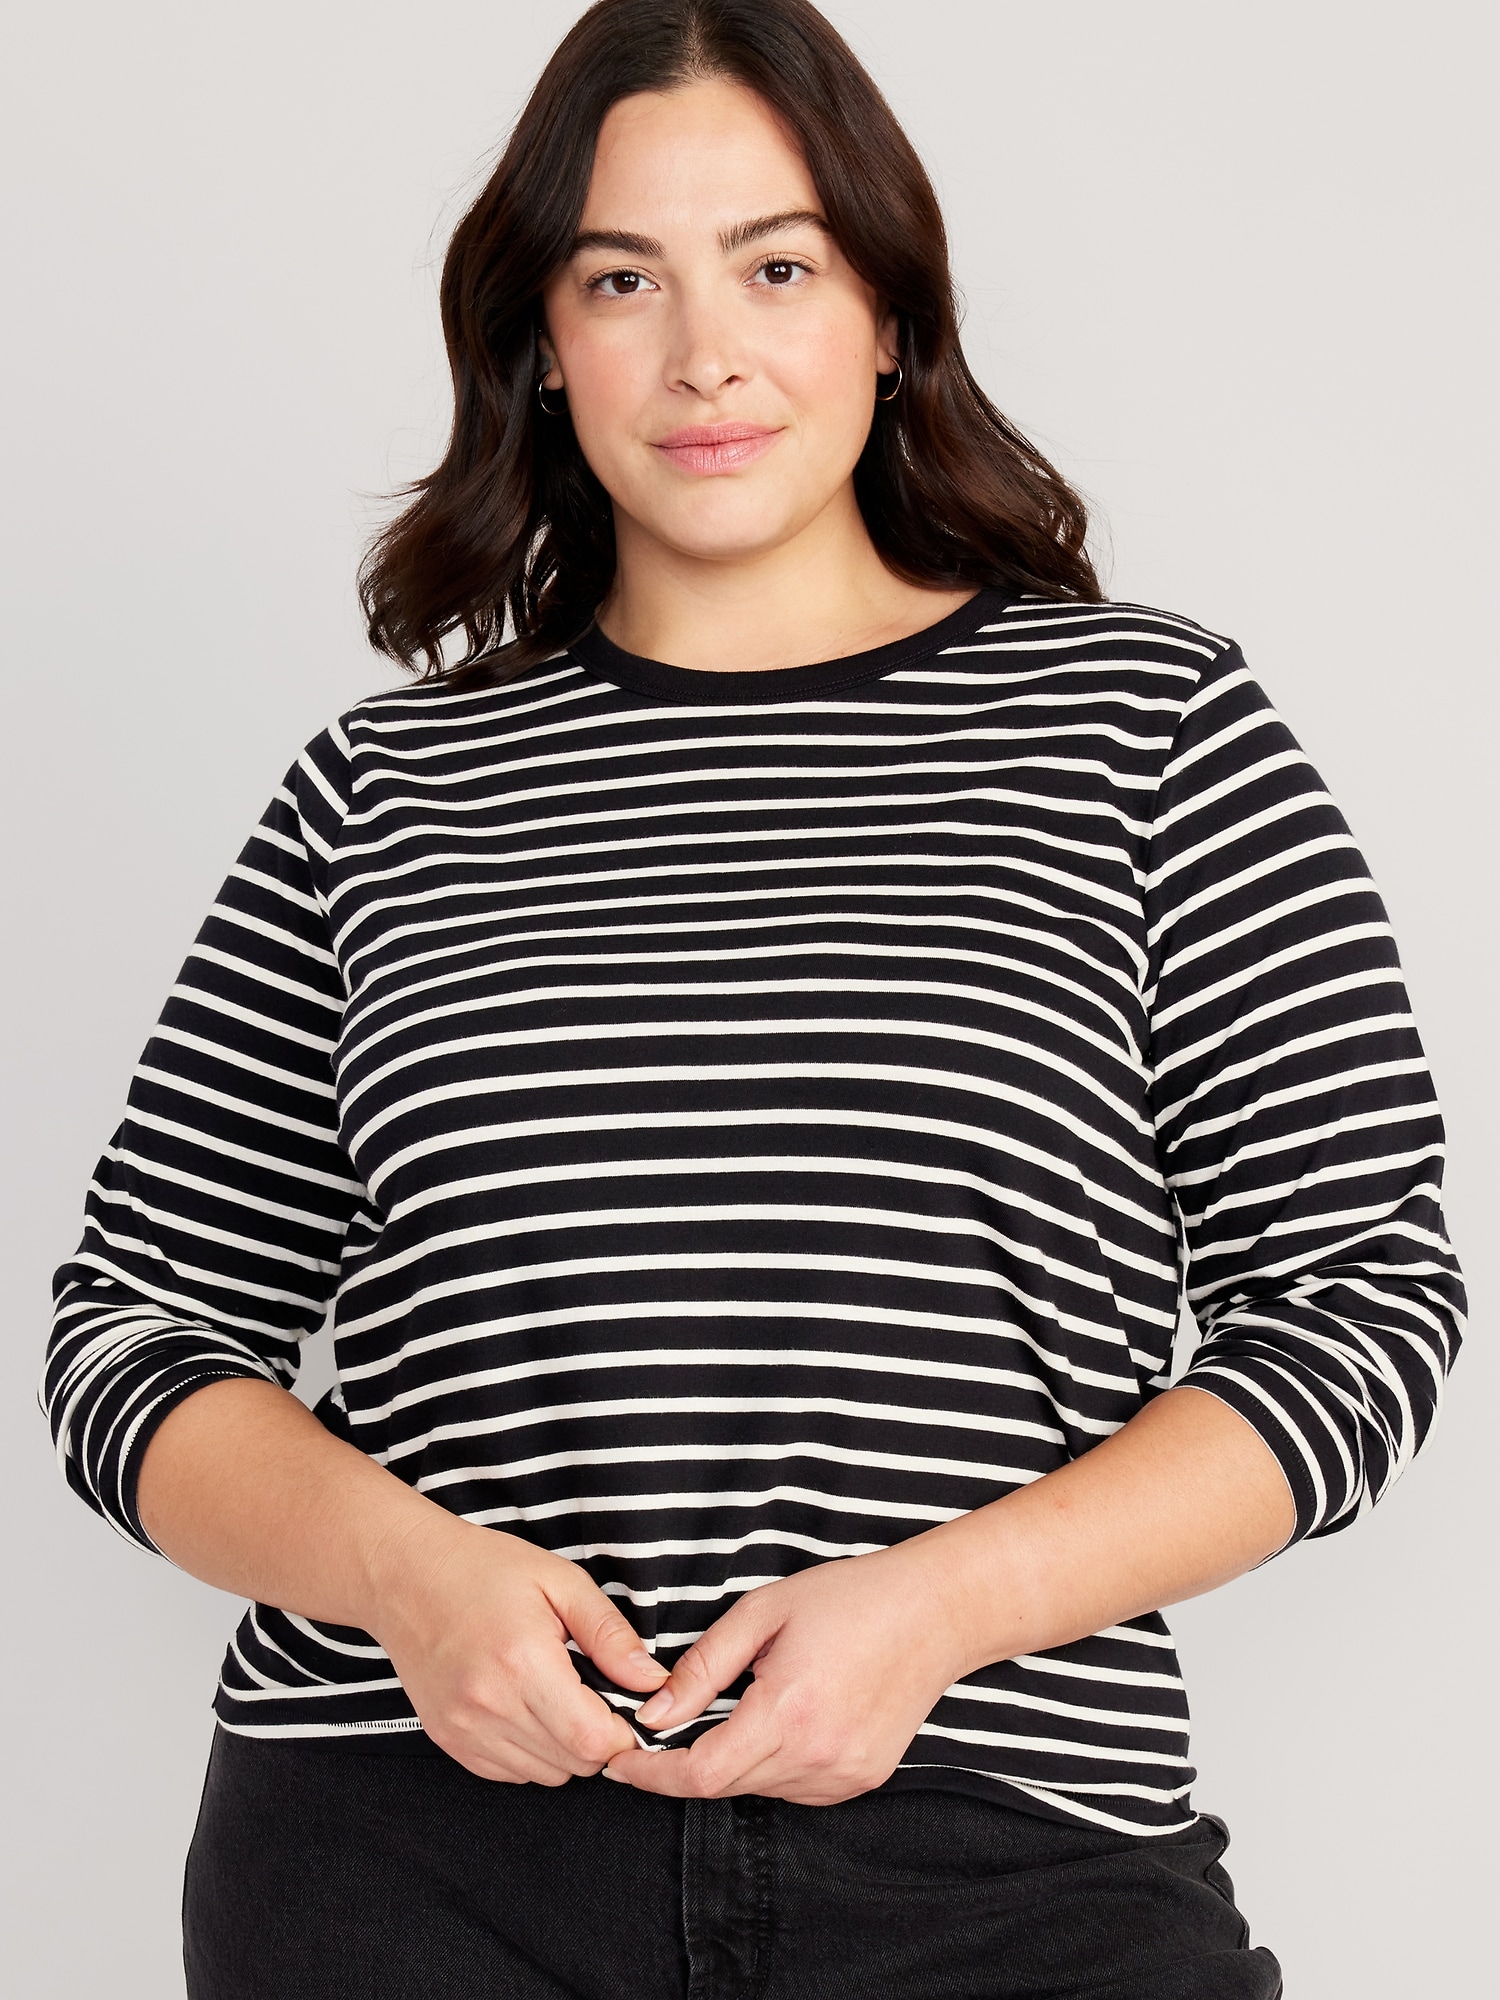 Plus Size Long Sleeve Tops